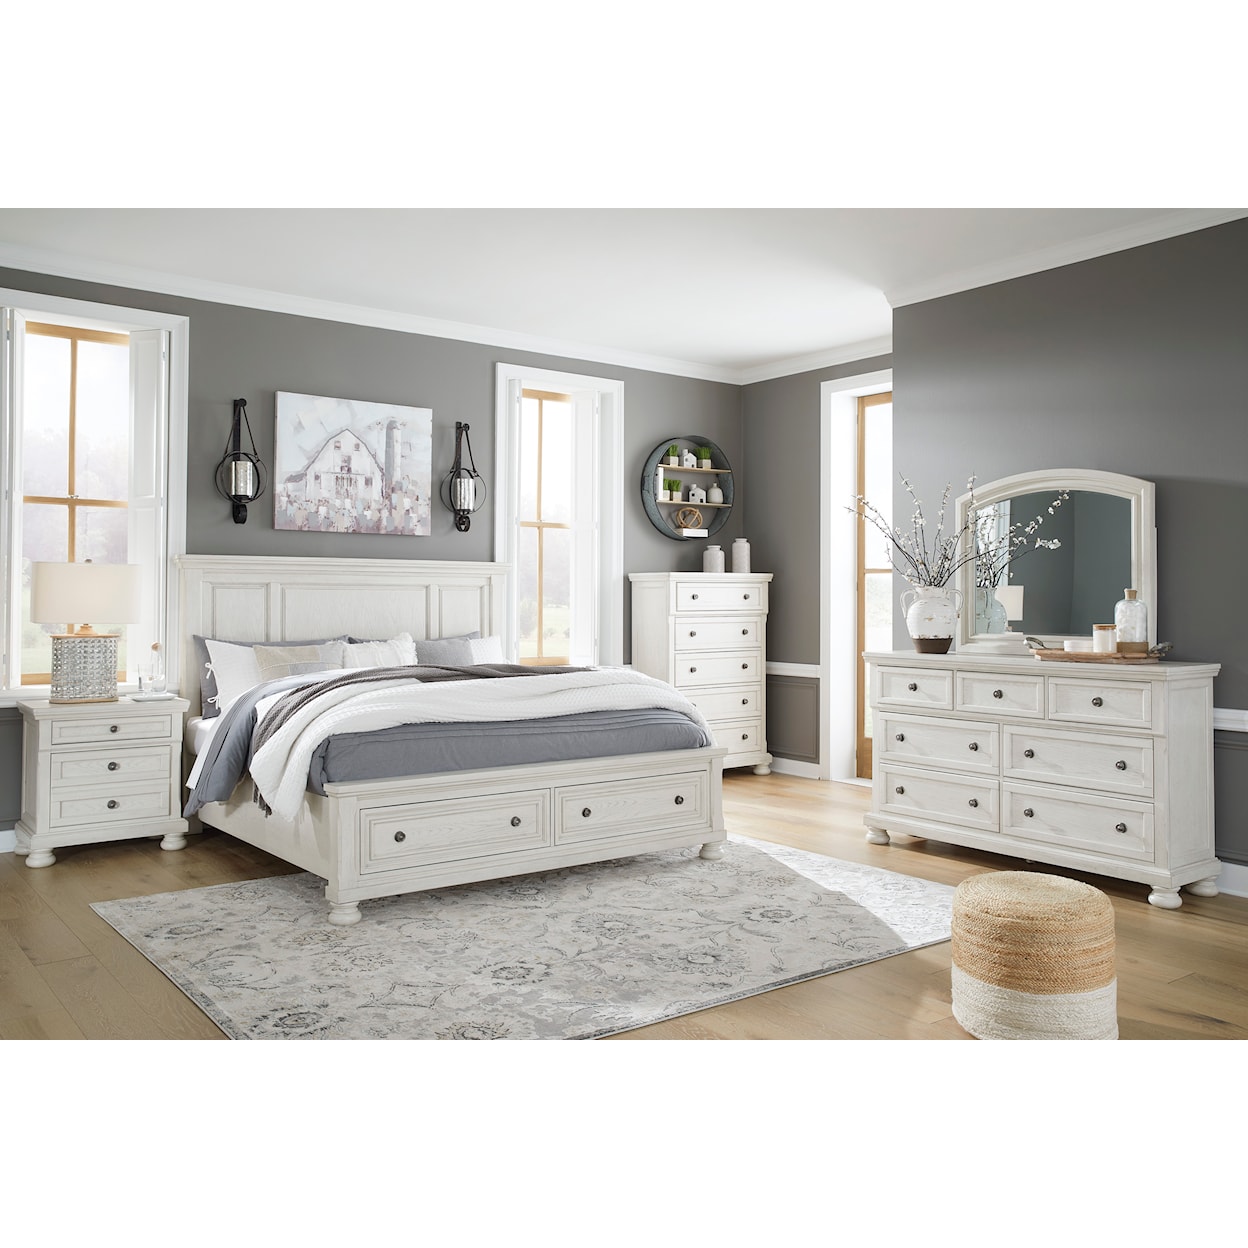 Ashley Furniture Signature Design Robbinsdale King Panel Bed with Storage